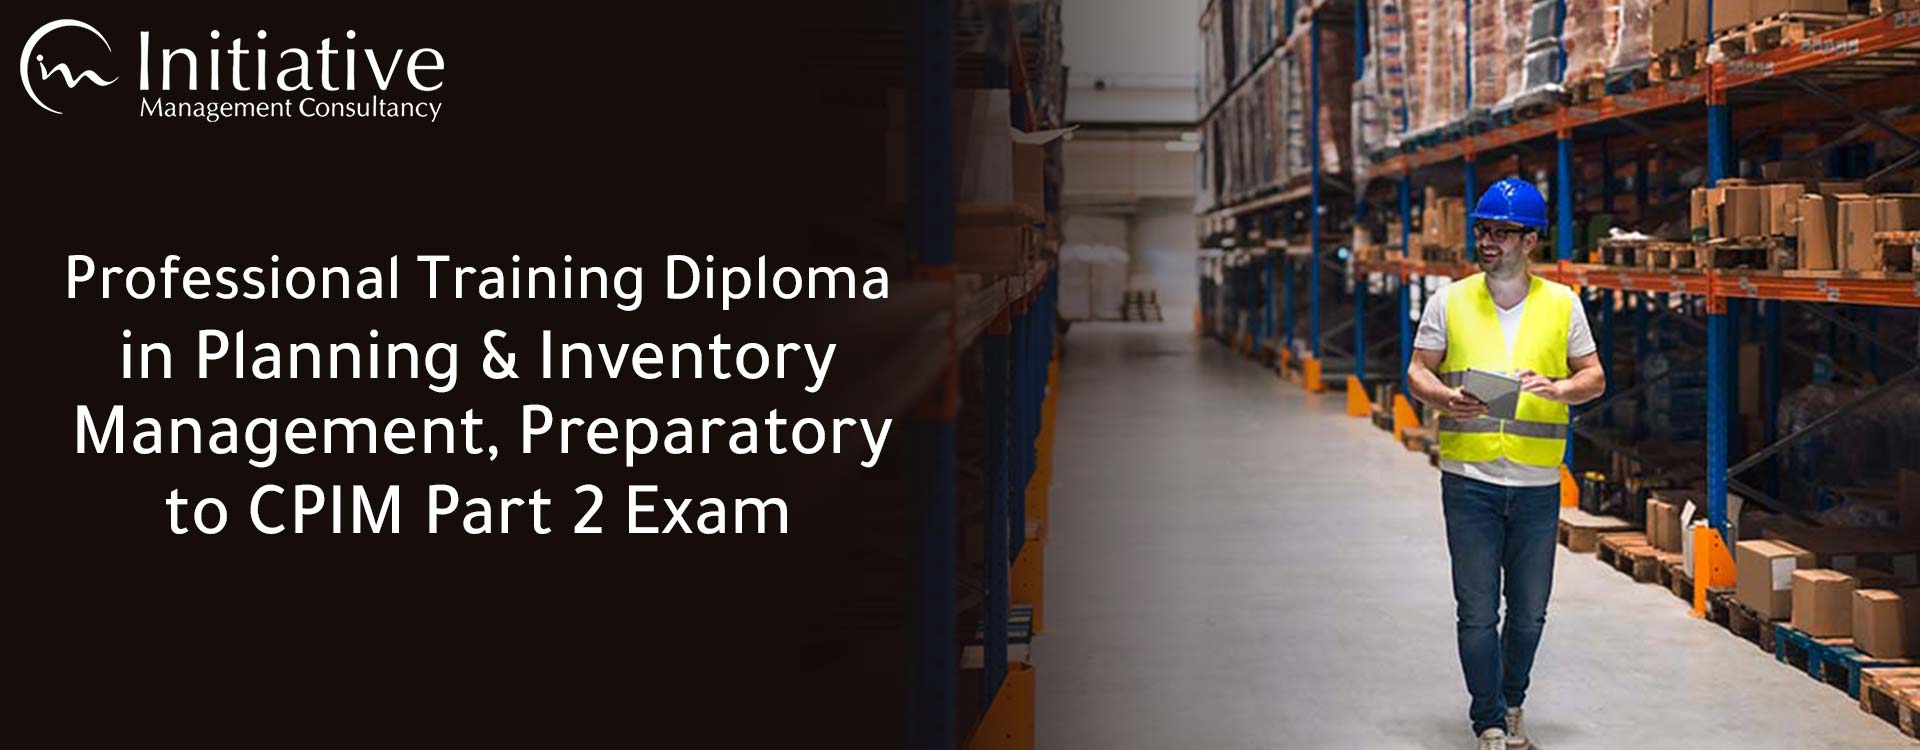 Professional Diploma of Certified in Planning and Inventory Management, Preparatory to CPIM Part 2 Exam